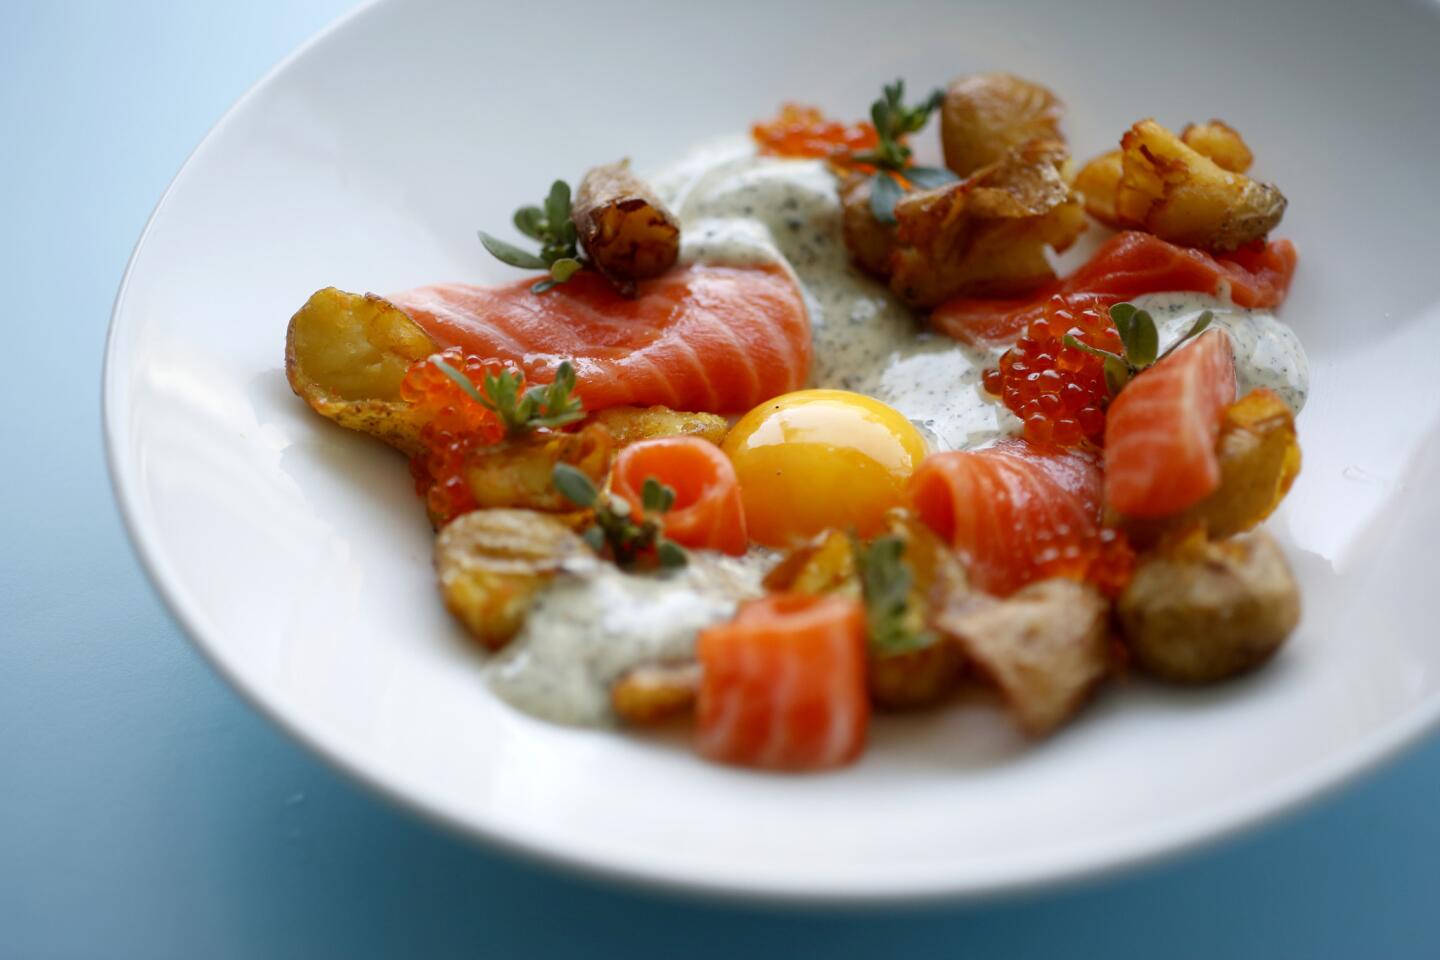 Try the crispy potatoes with smoked salmon, egg yolk, seaweed and roe at Alma at the Standard Hotel in West Hollywood.